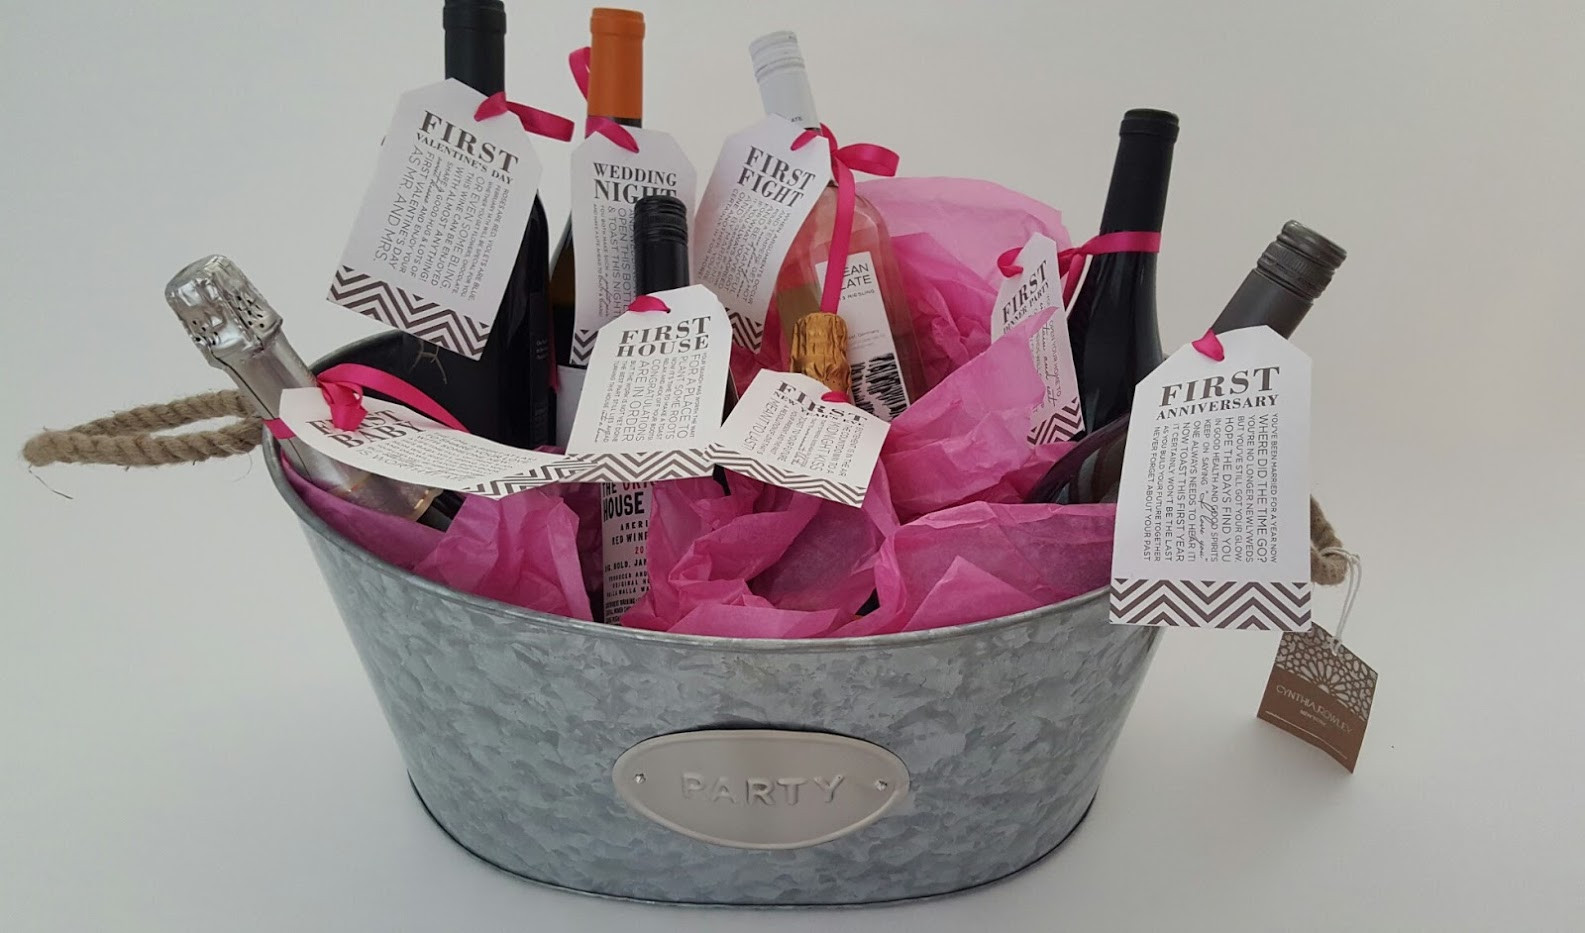 DIY Wedding Shower Gift
 Bridal Shower Gift DIY to Try A Basket of “Firsts” for